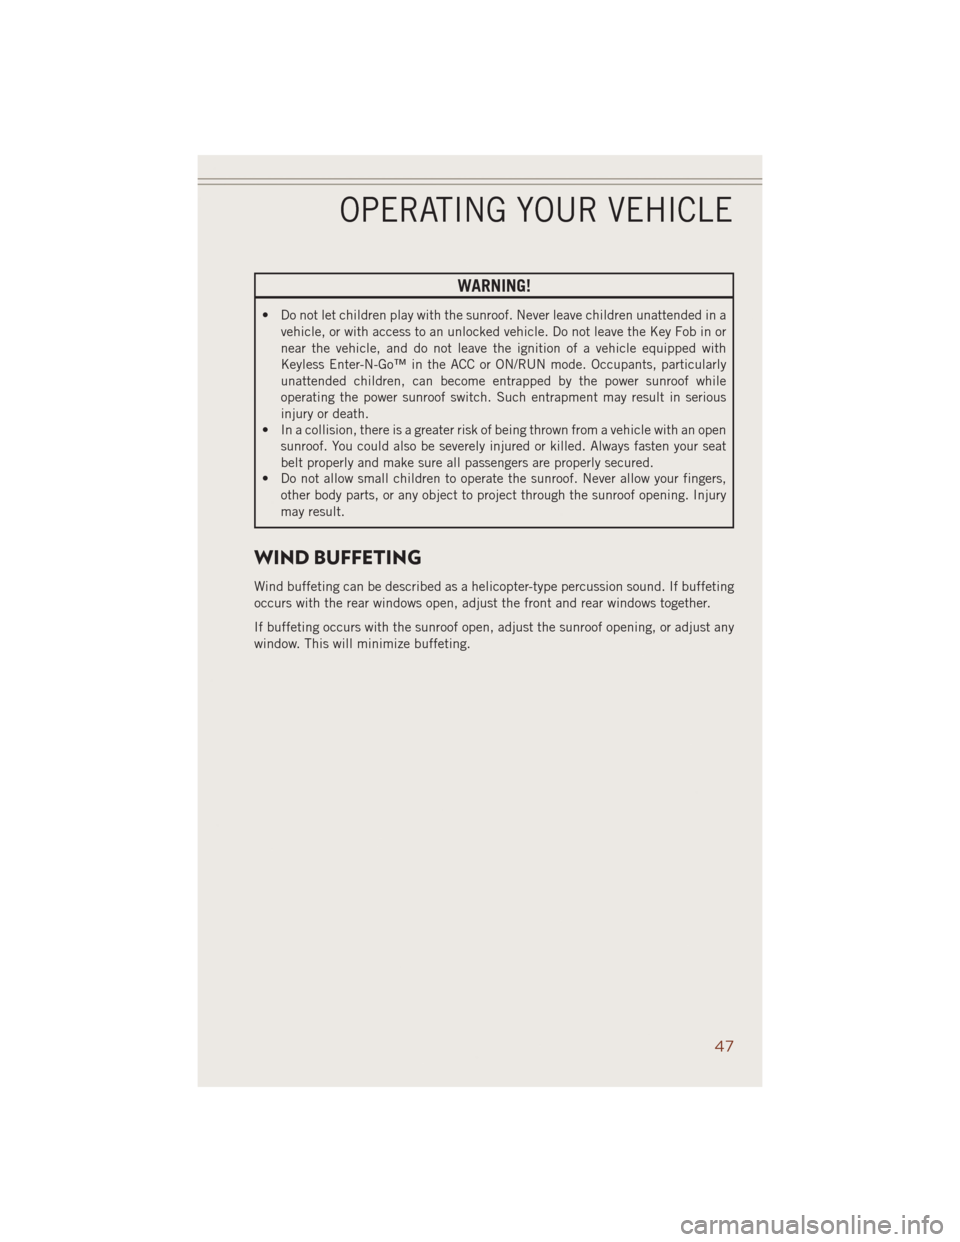 JEEP GRAND CHEROKEE 2014 WK2 / 4.G User Guide WARNING!
• Do not let children play with the sunroof. Never leave children unattended in a
vehicle, or with access to an unlocked vehicle. Do not leave the Key Fob in or
near the vehicle, and do not